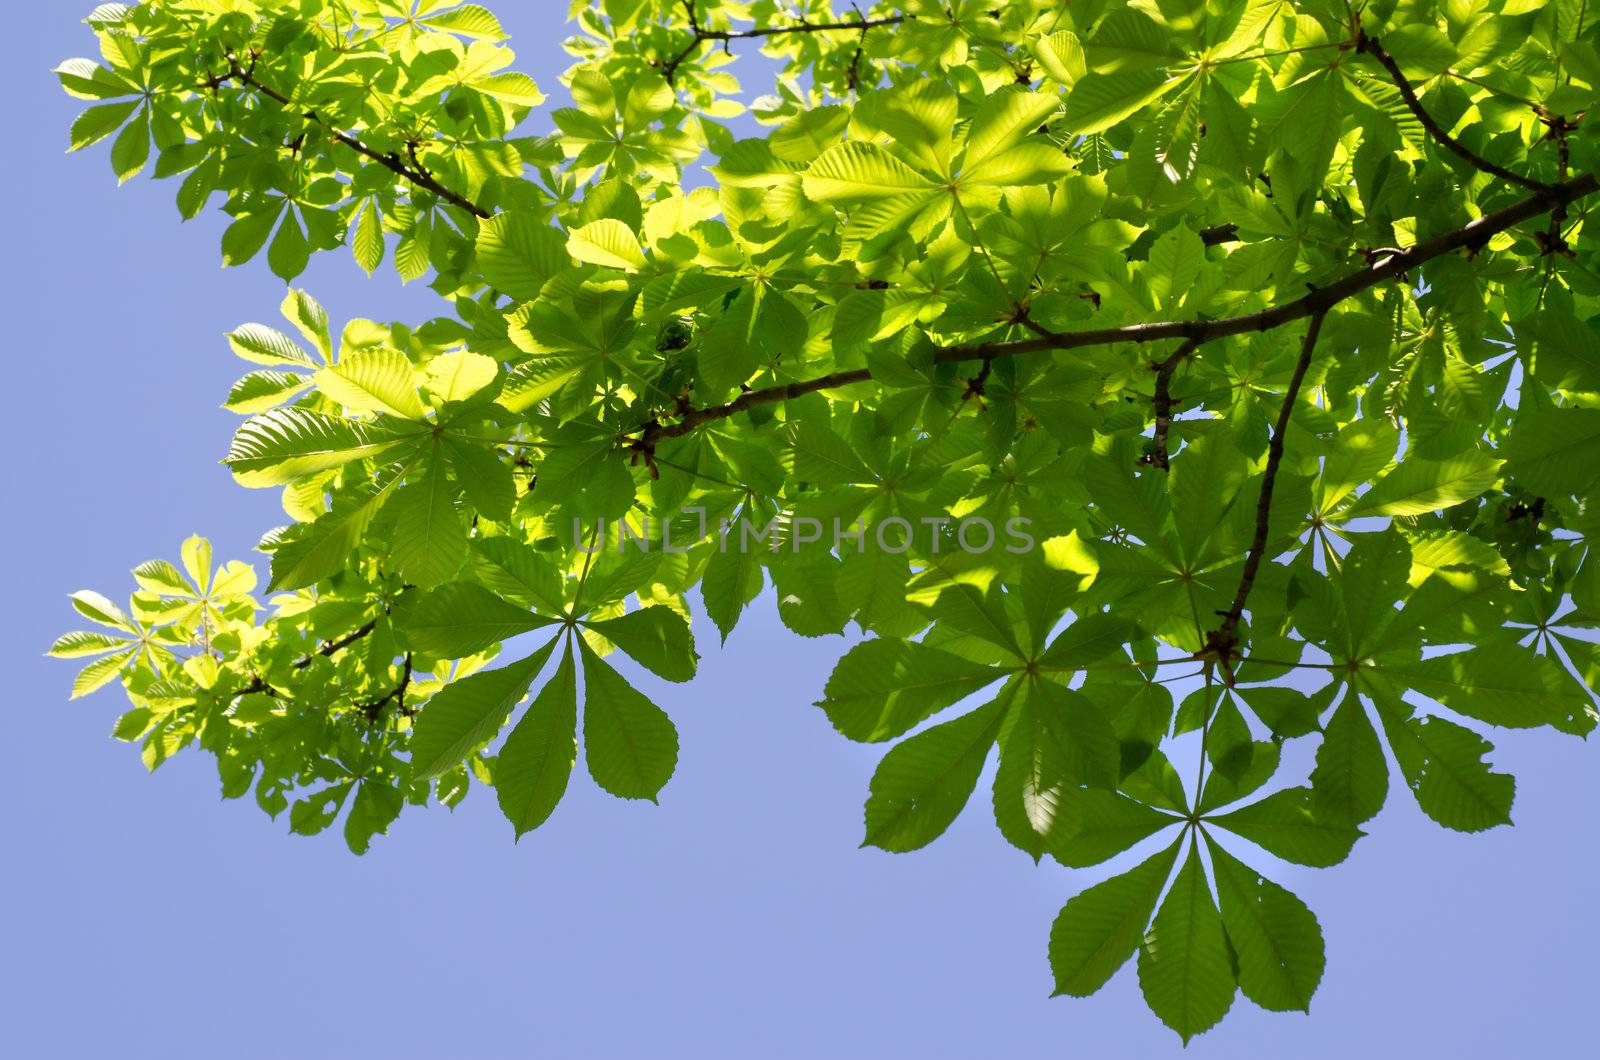 Chestnut branches against the blue sky